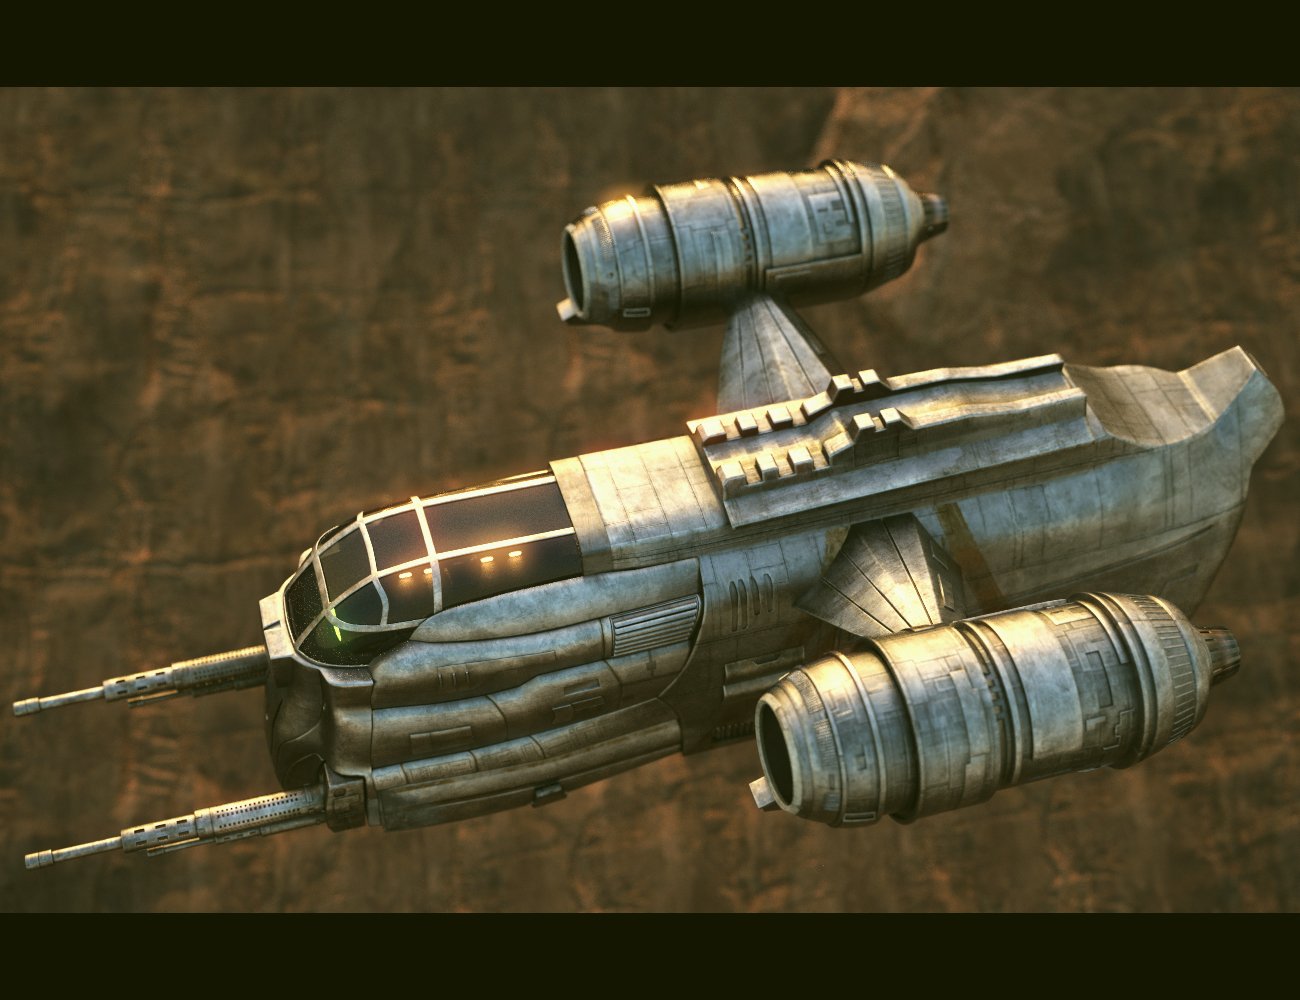 Interplanetary Spaceship by: Charlie, 3D Models by Daz 3D